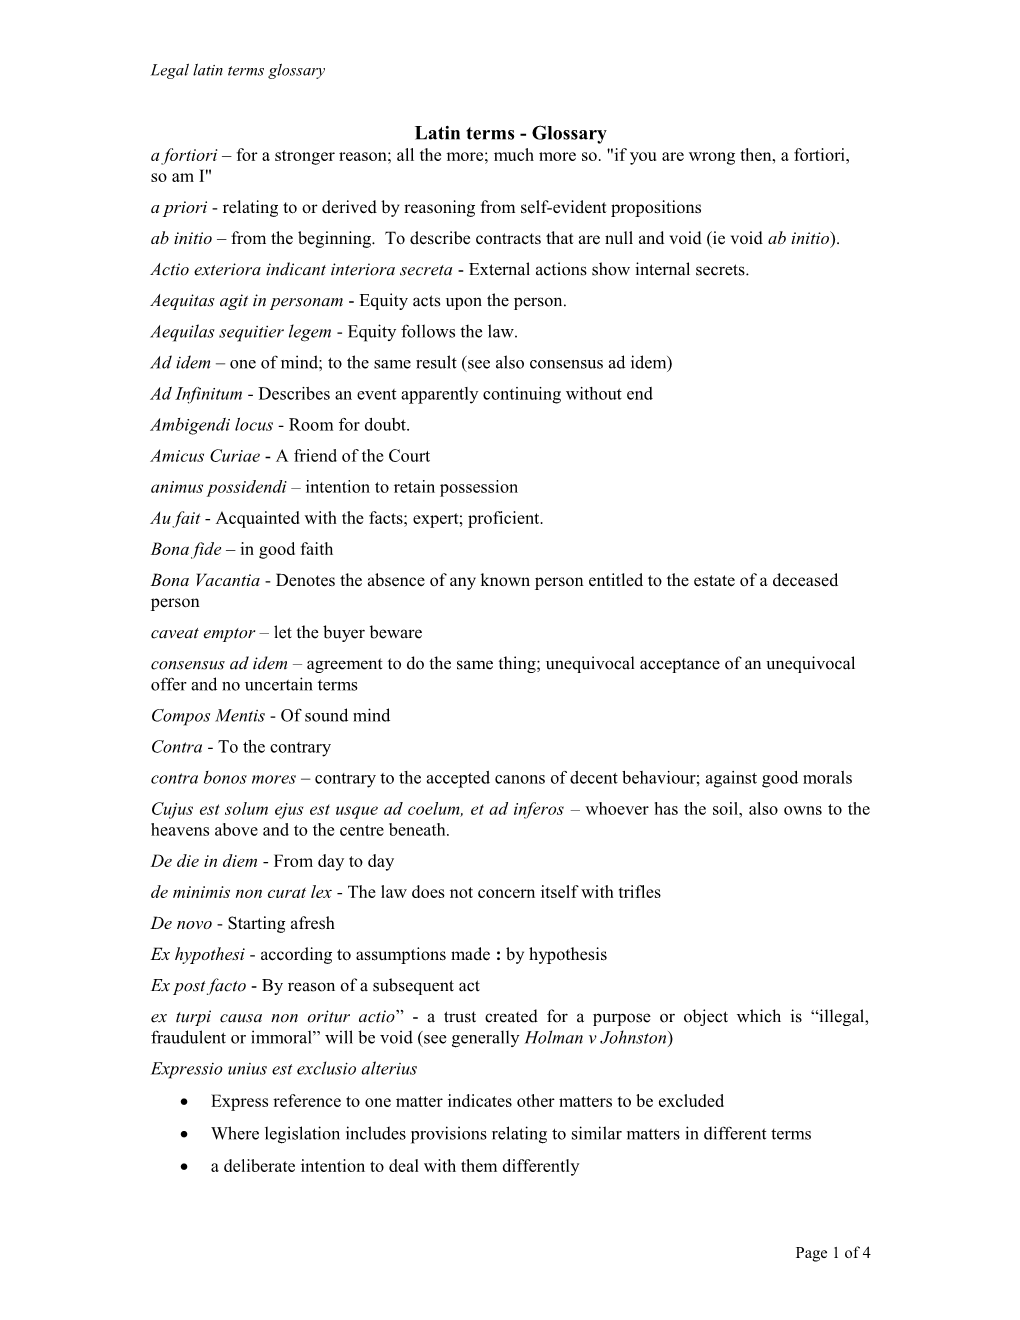 Legal Latin Terms Glossary